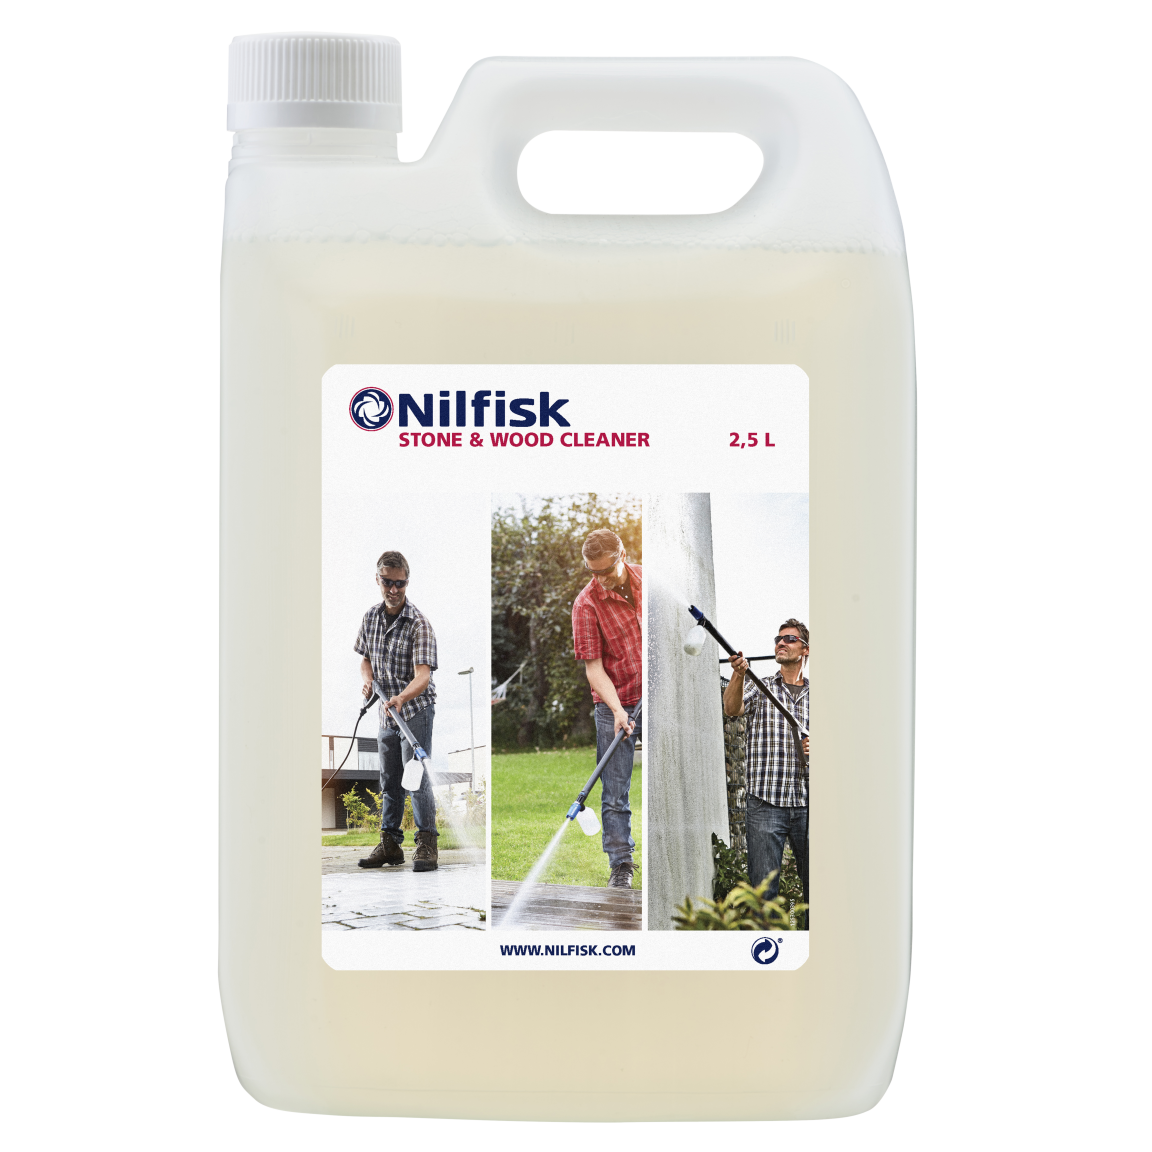 Nilfisk -  Stone & Wood Cleaner is a water-based universal cleaner